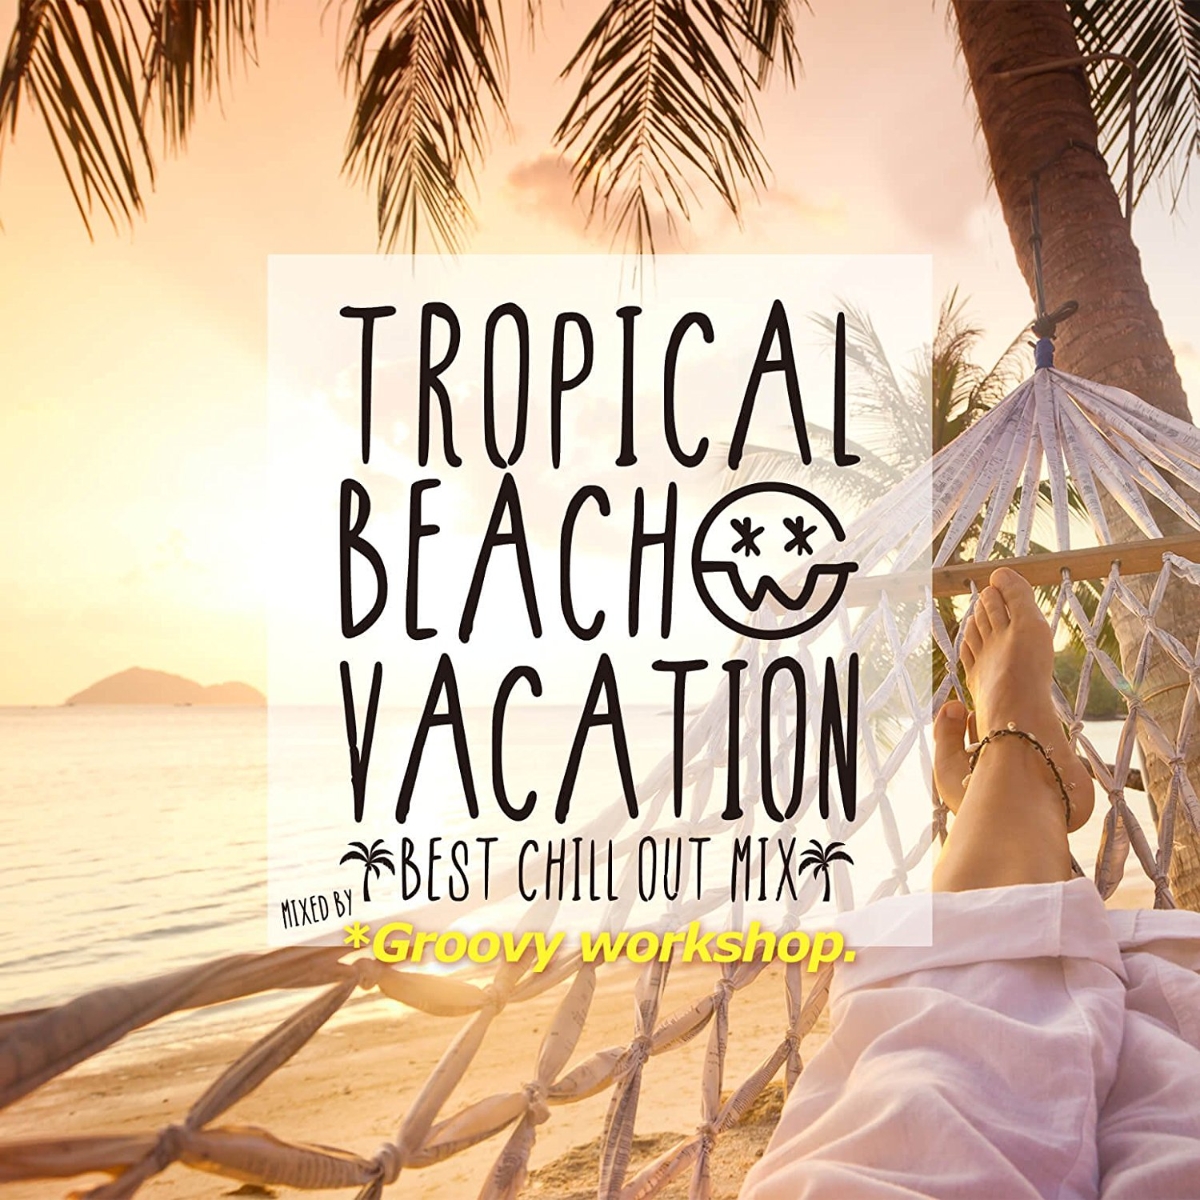 Tropical Beach Vacation -Best Chill Out Mix- mixed by Groovy workshop画像